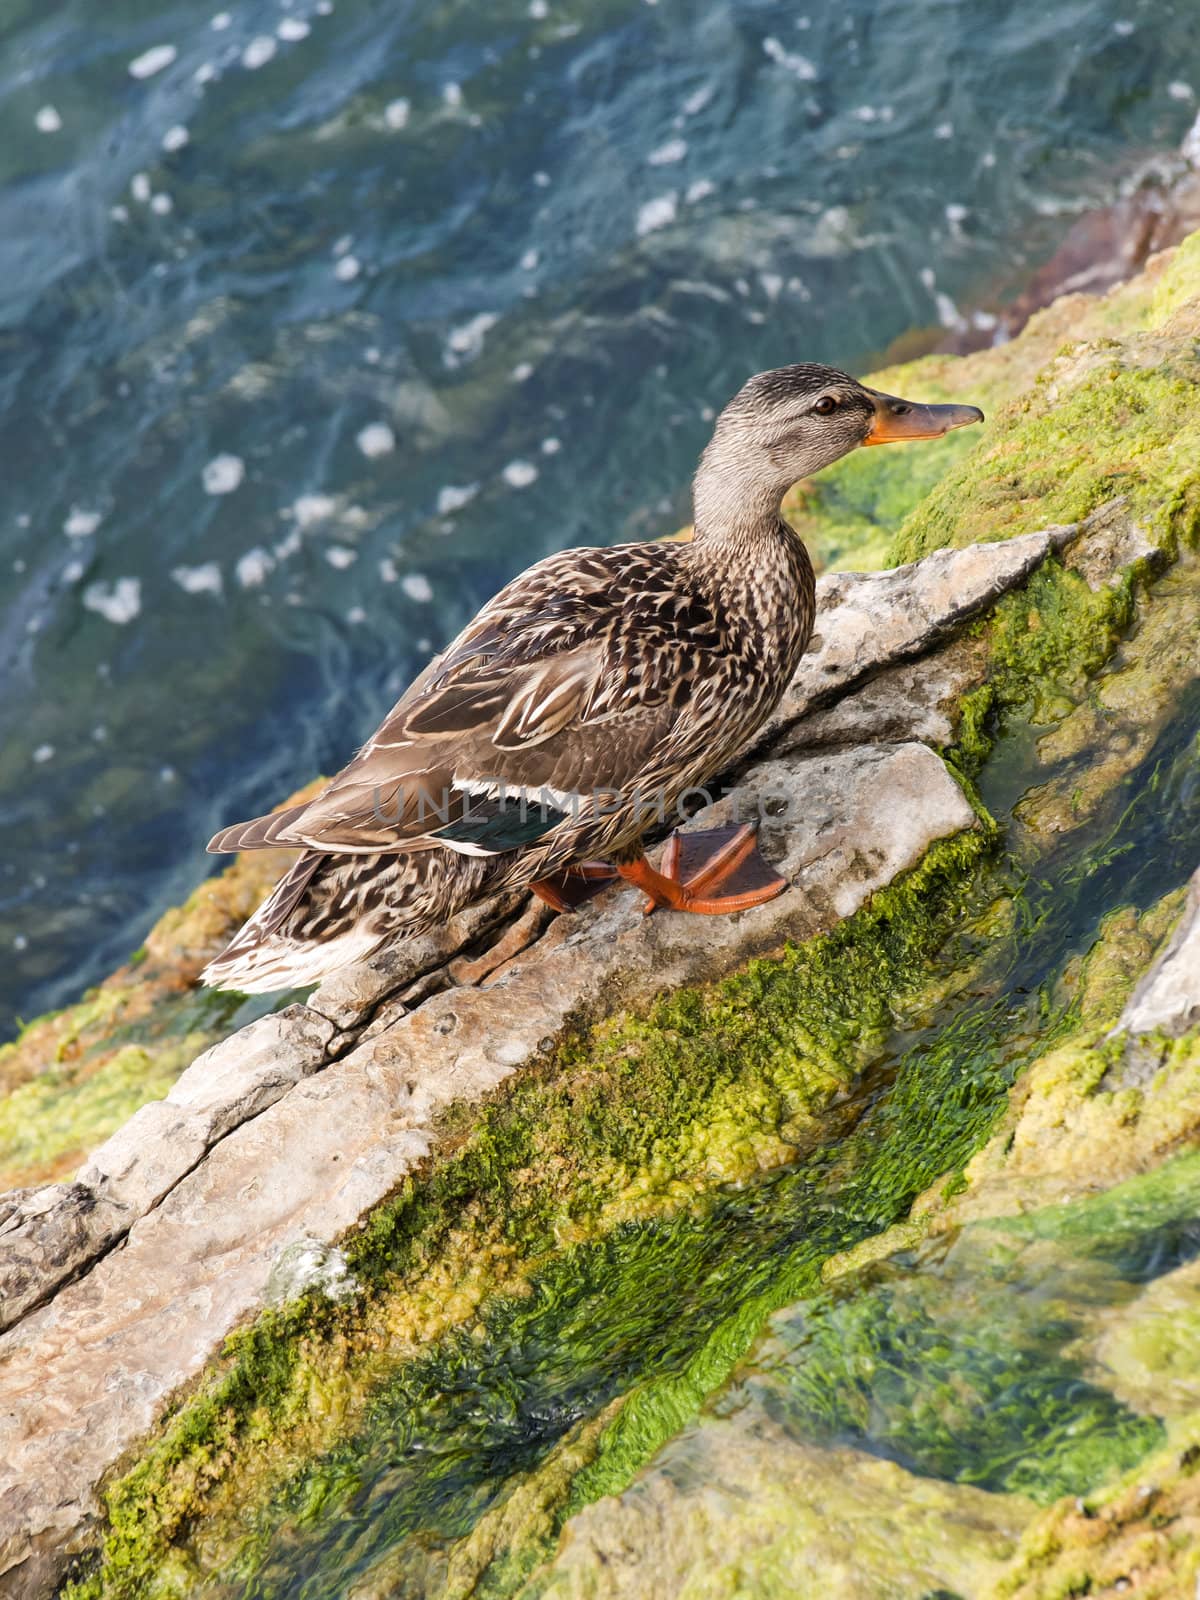 Duck resting on the rocks filled with slush